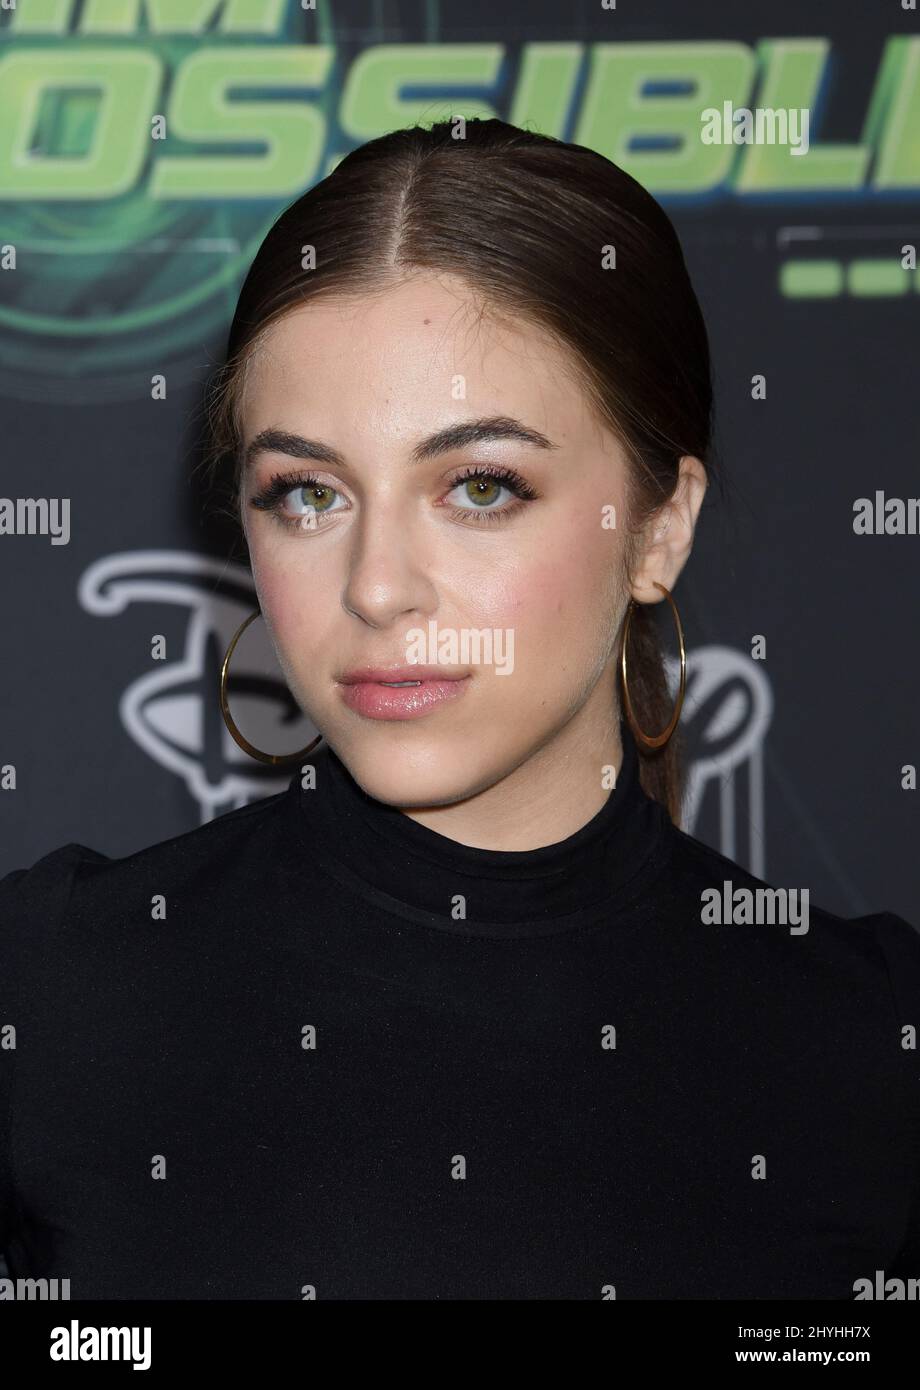 Baby Ariel at Disney Channel's 'Kim Possible' Premiere held at the Television Academy Stock Photo